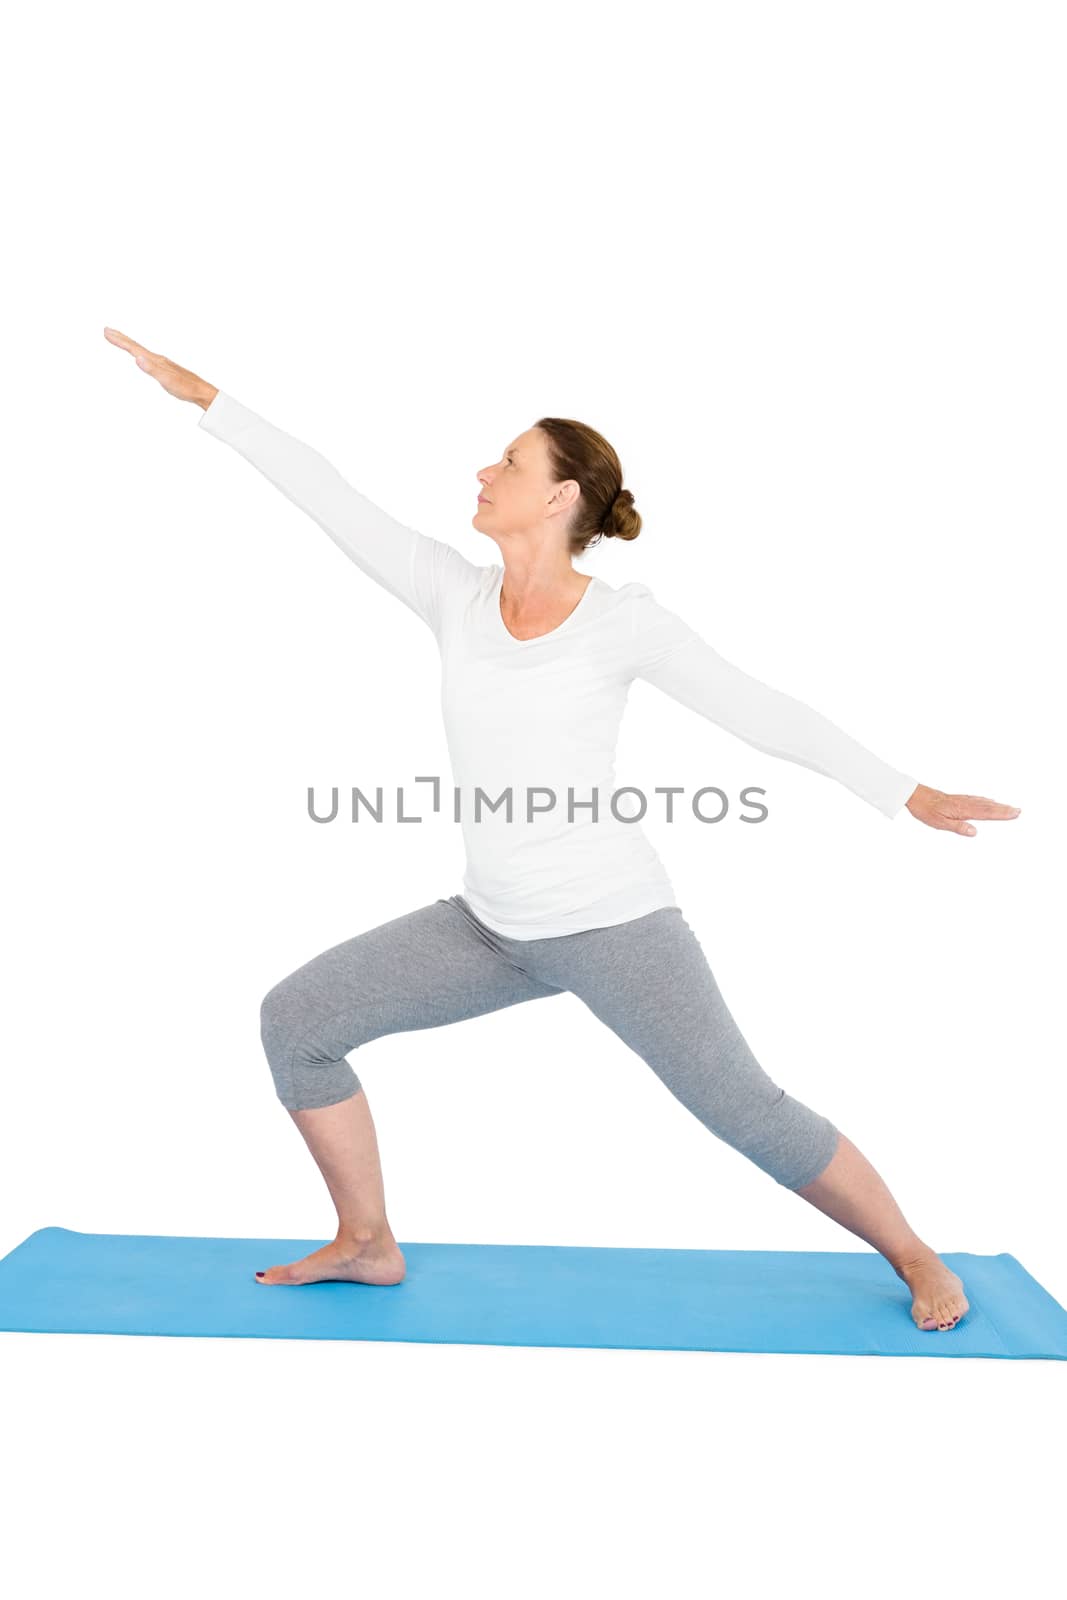 Full length of woman with arms outstretched while exercising on while background